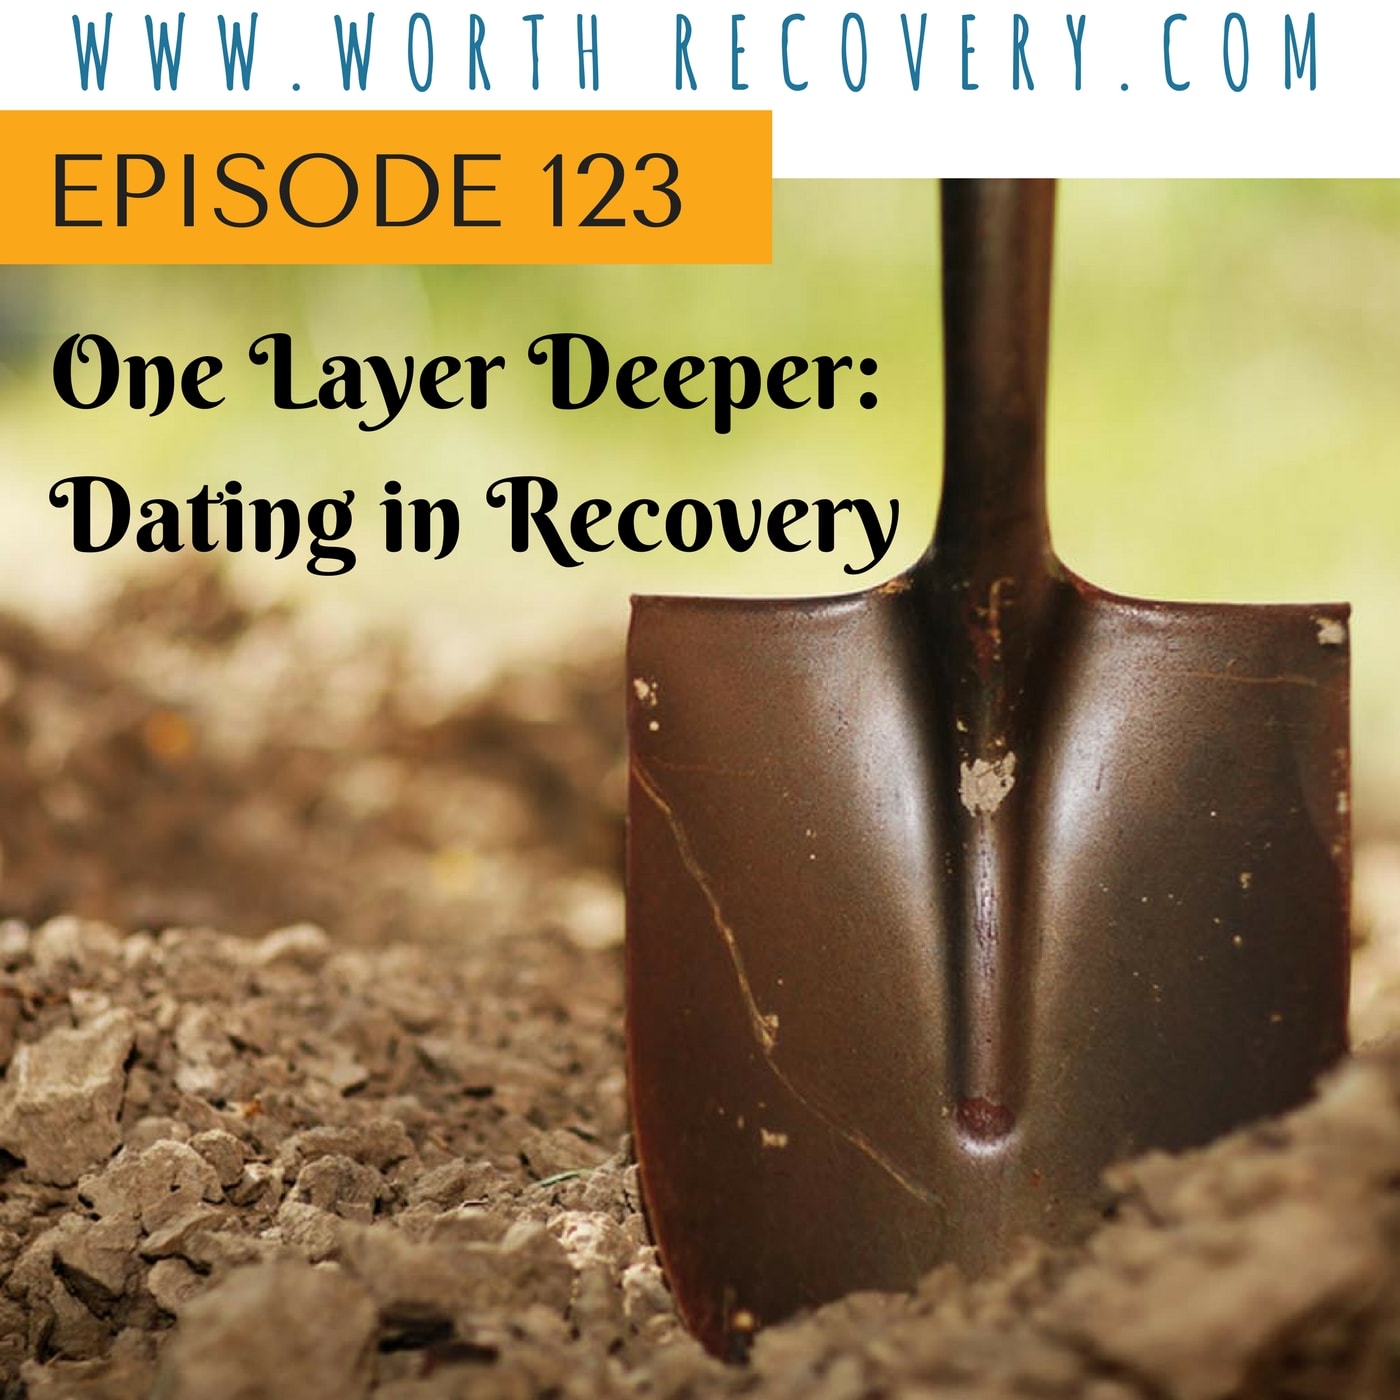 Episode 123: One Layer Deeper - Dating in Recovery